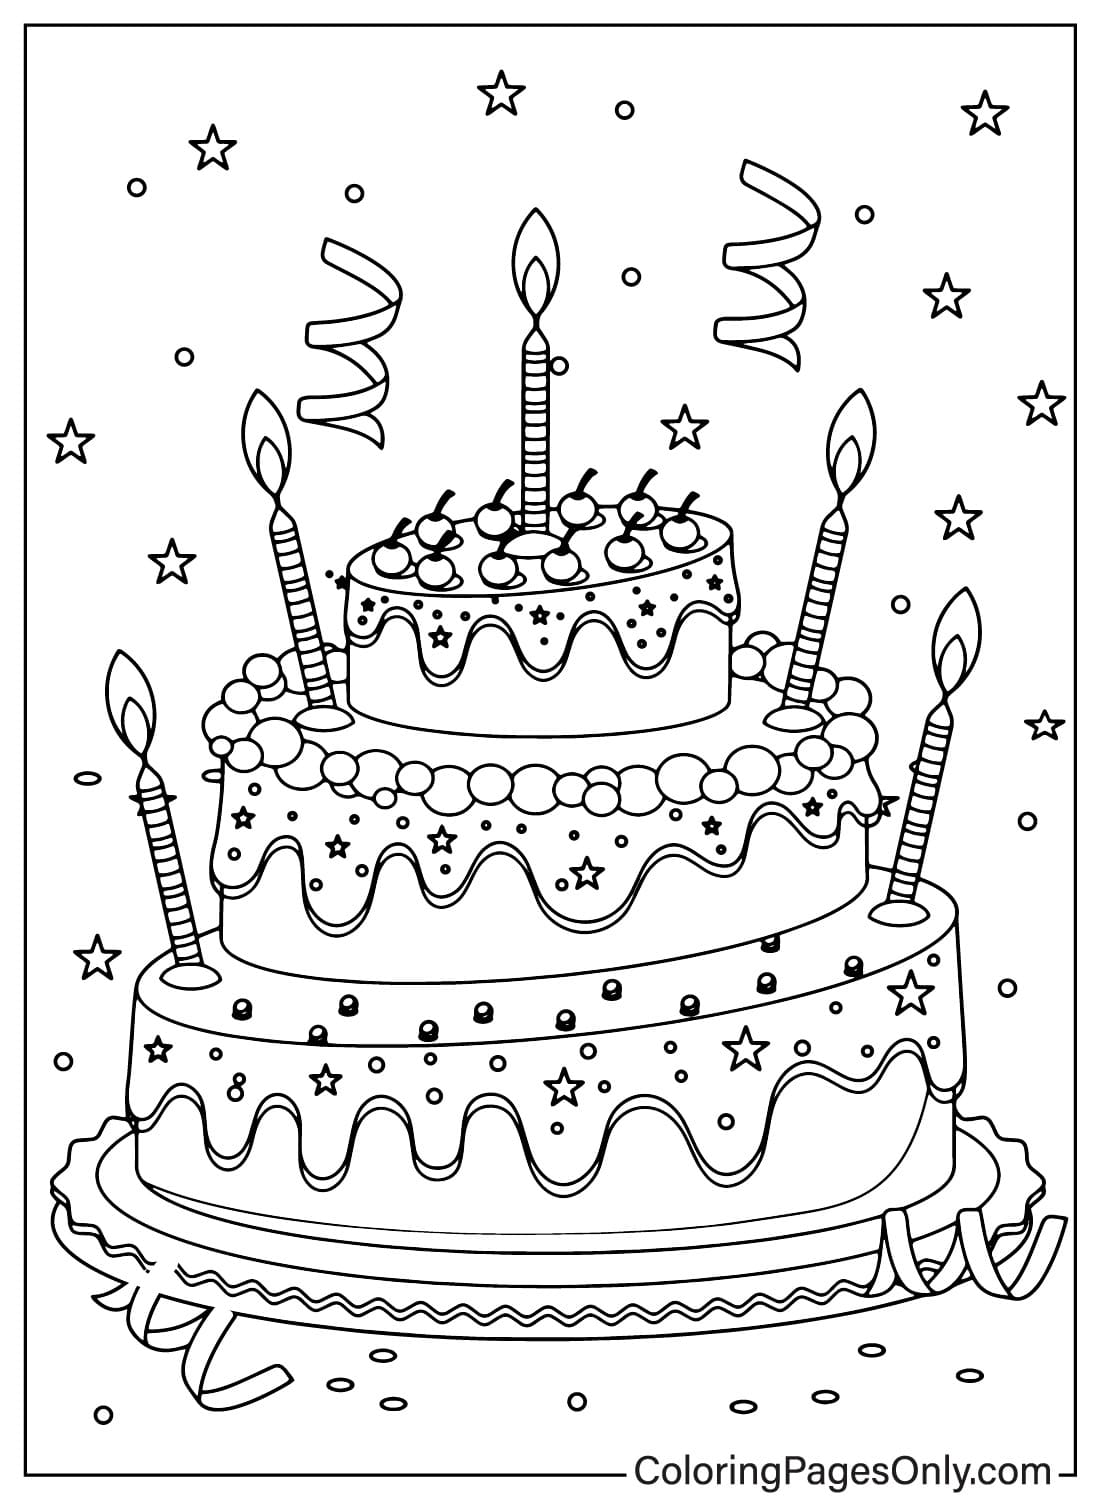 Coloring Page Birthday Cake from Birthday Cake